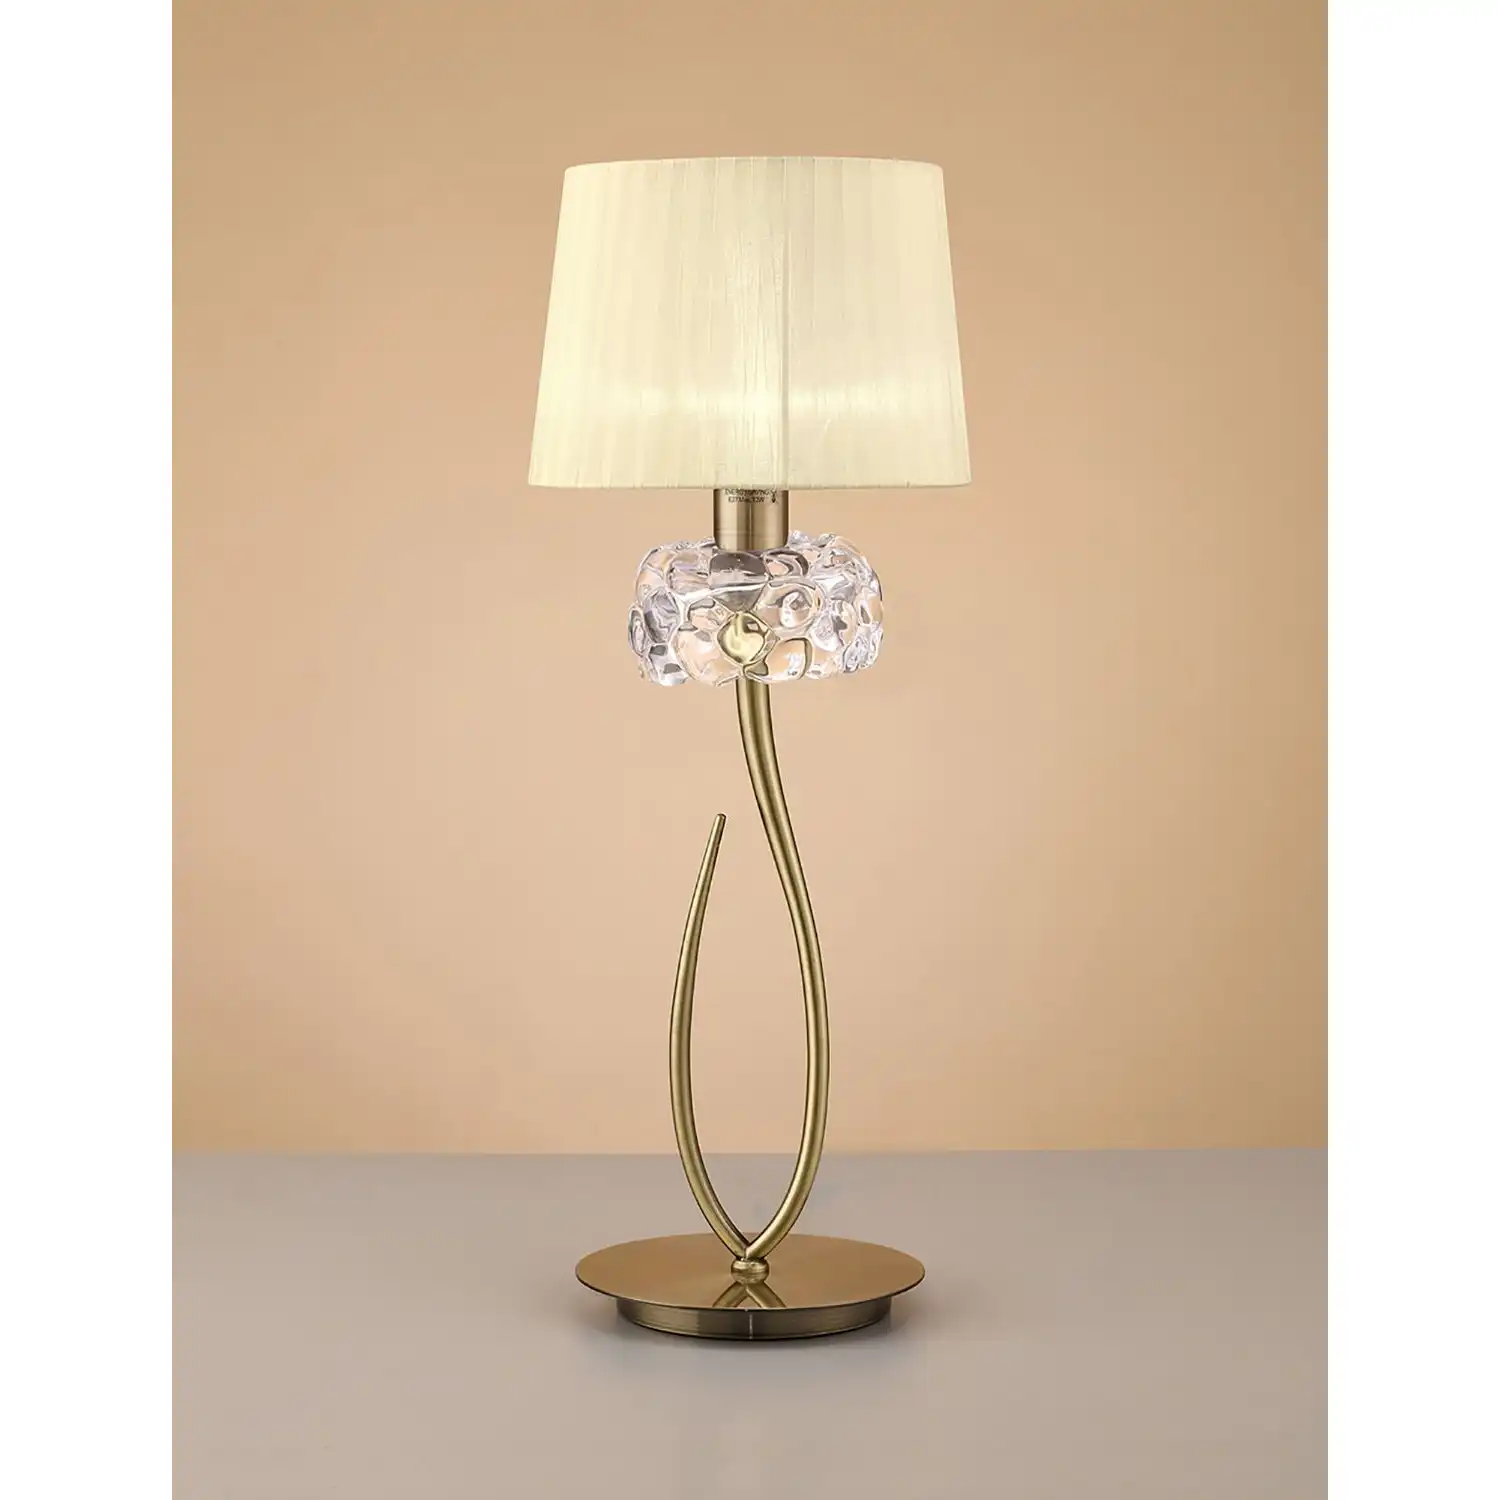 Loewe Table Lamp 1 Light E27 Large, Antique Brass With Cream Shade